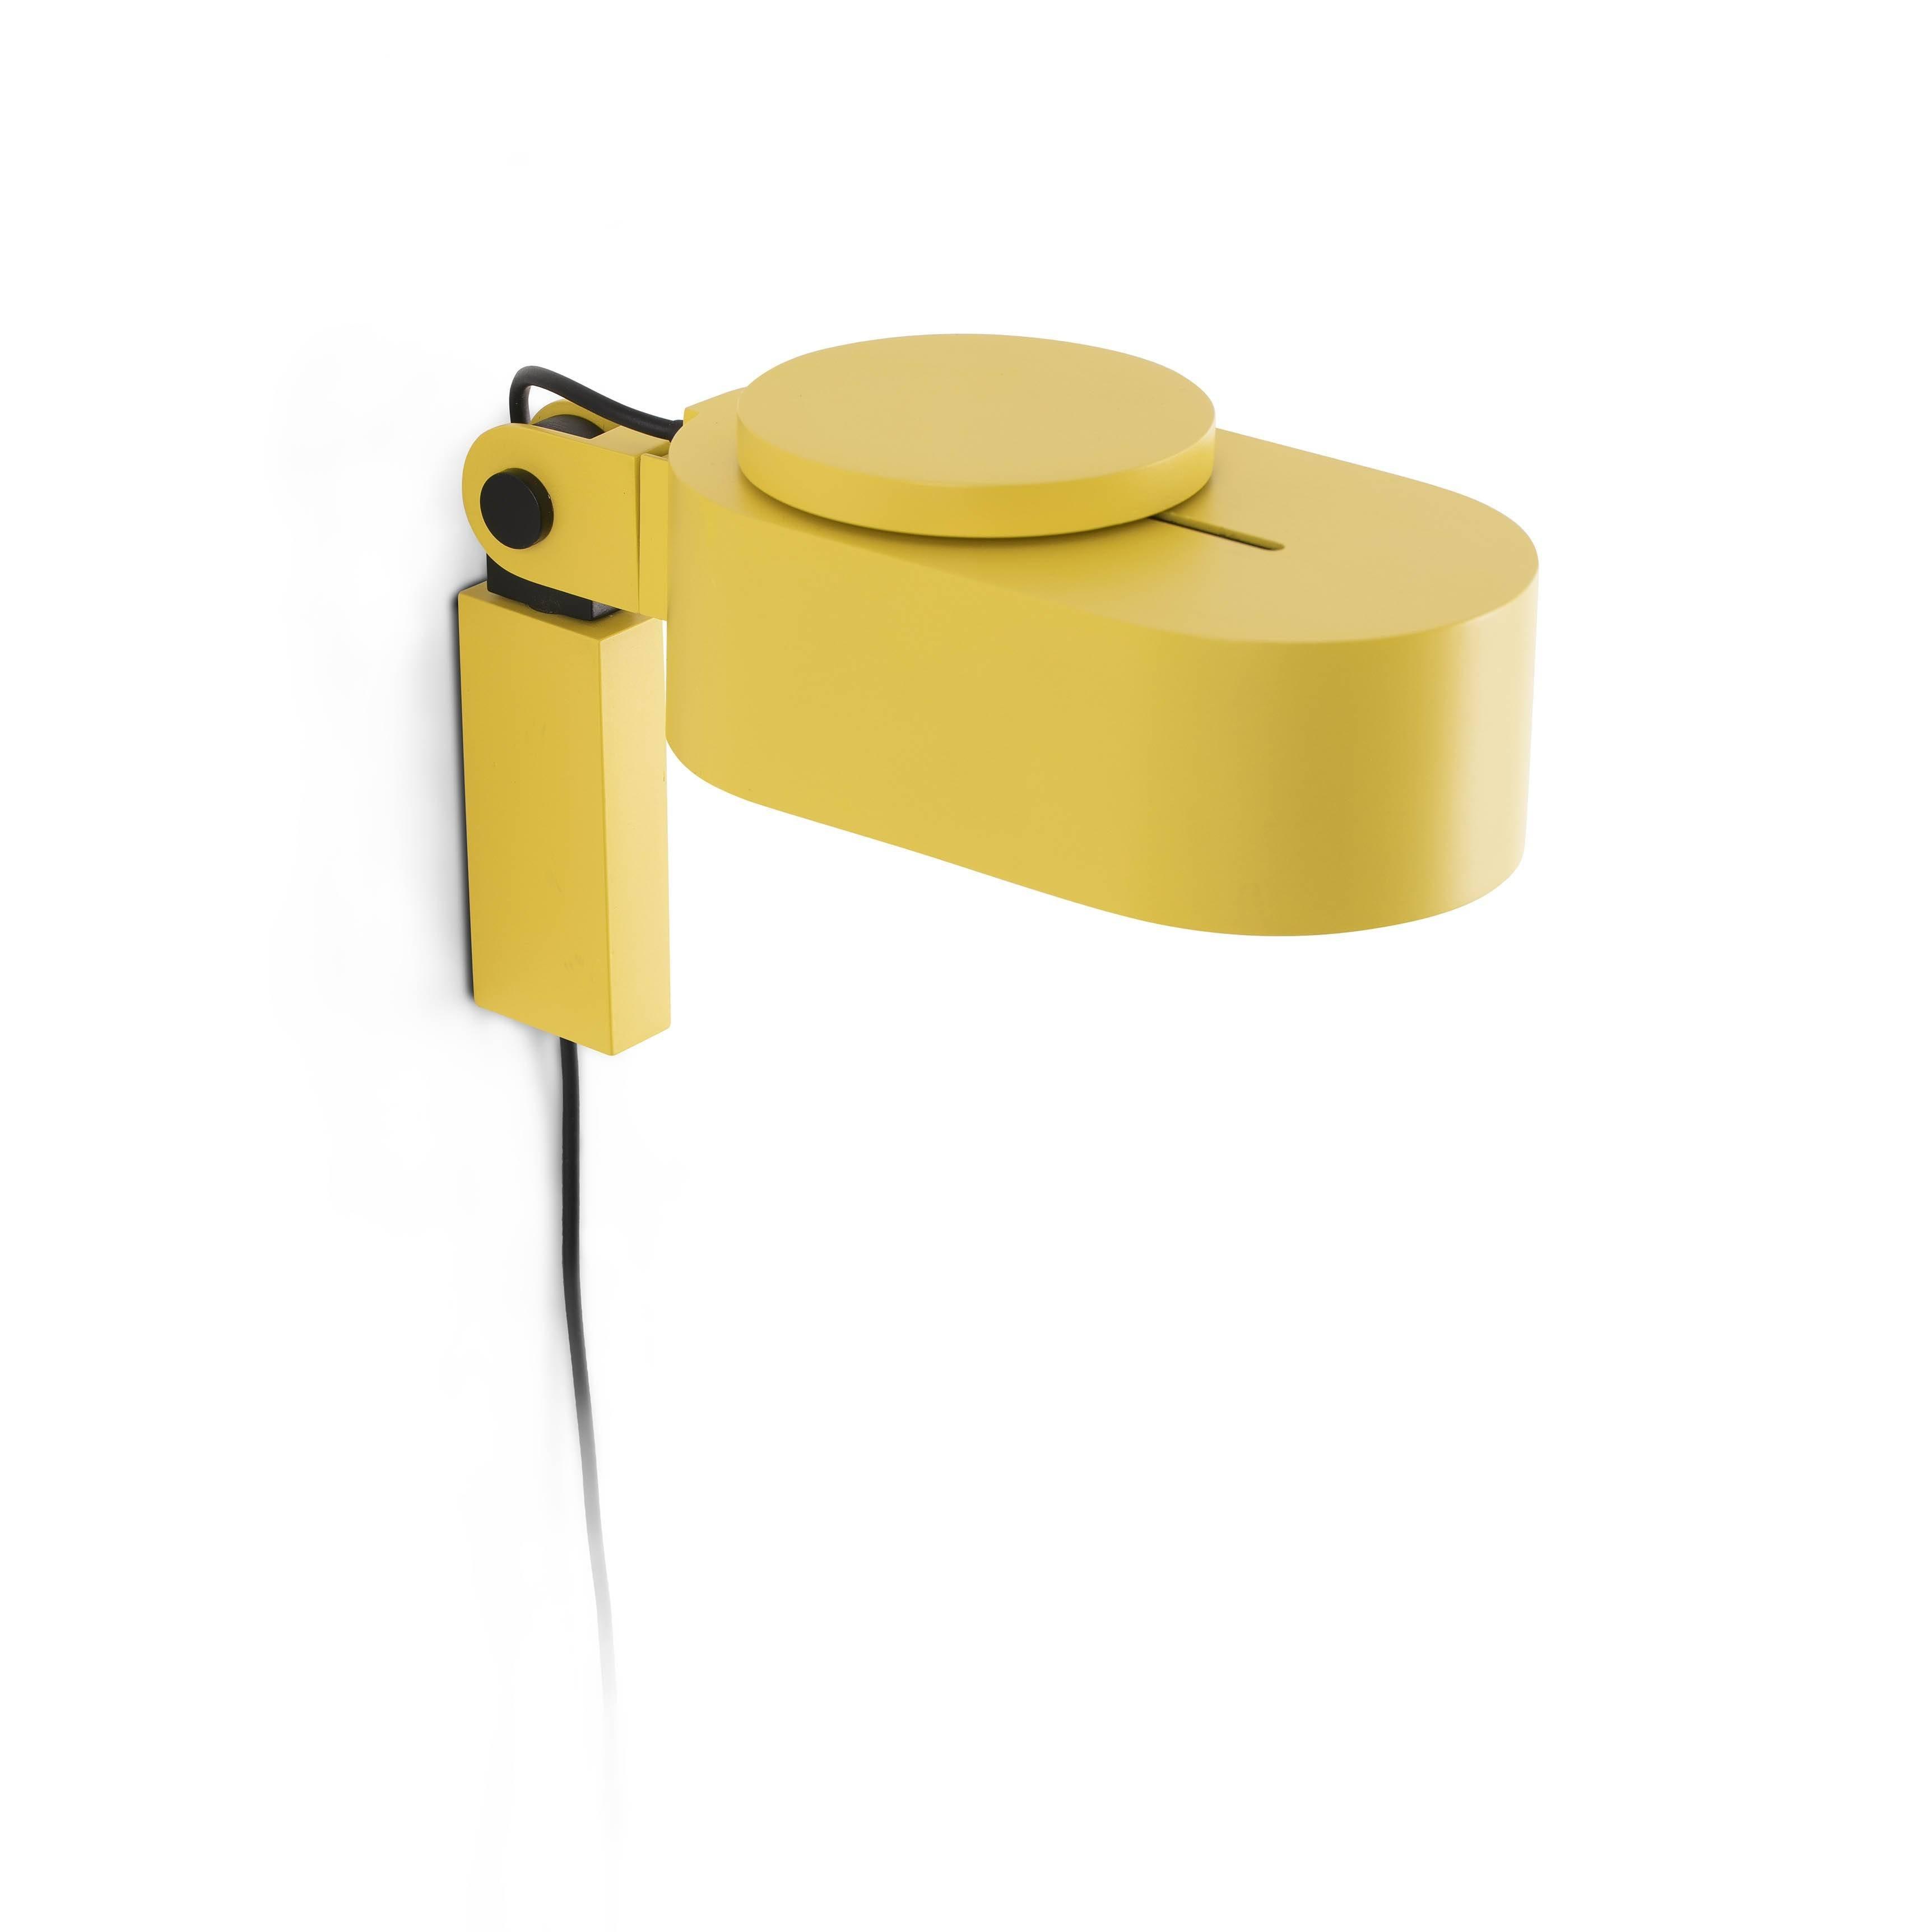 Inviting LED Adjustable Wall Lamp Yellow Dimmable 6W 2700K4800K